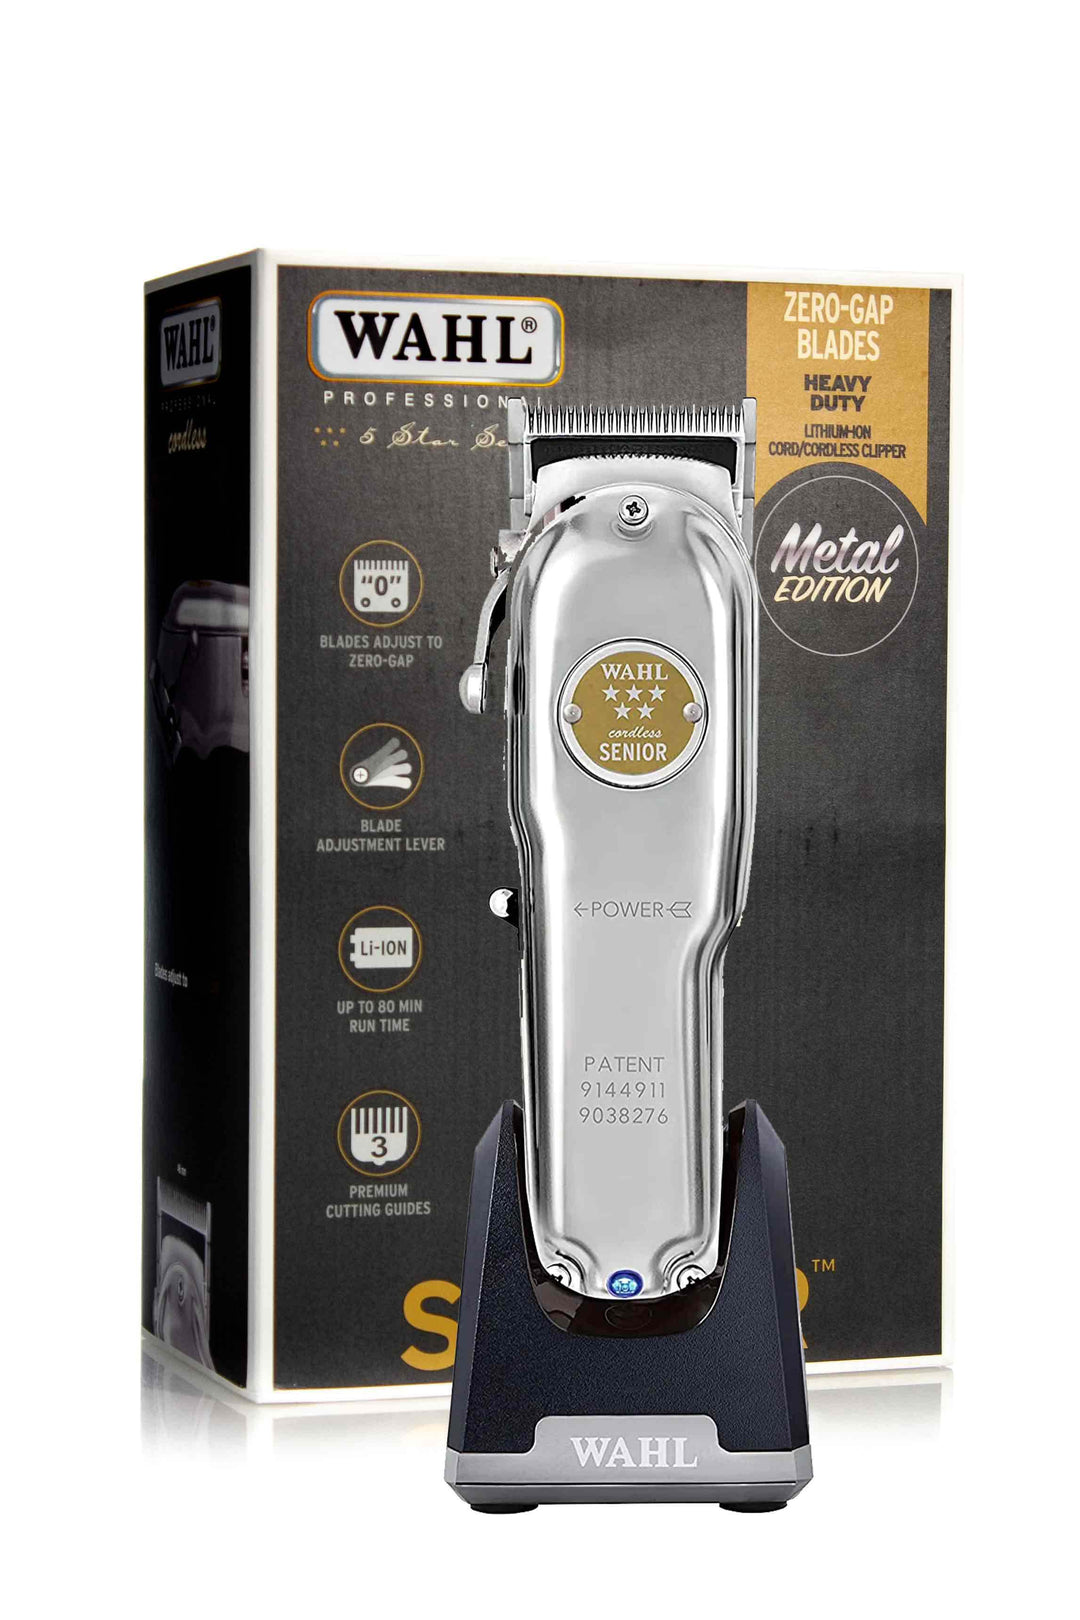 WAHL SENIOR CORDLESS CLIPPER METAL EDITION W/ STAND